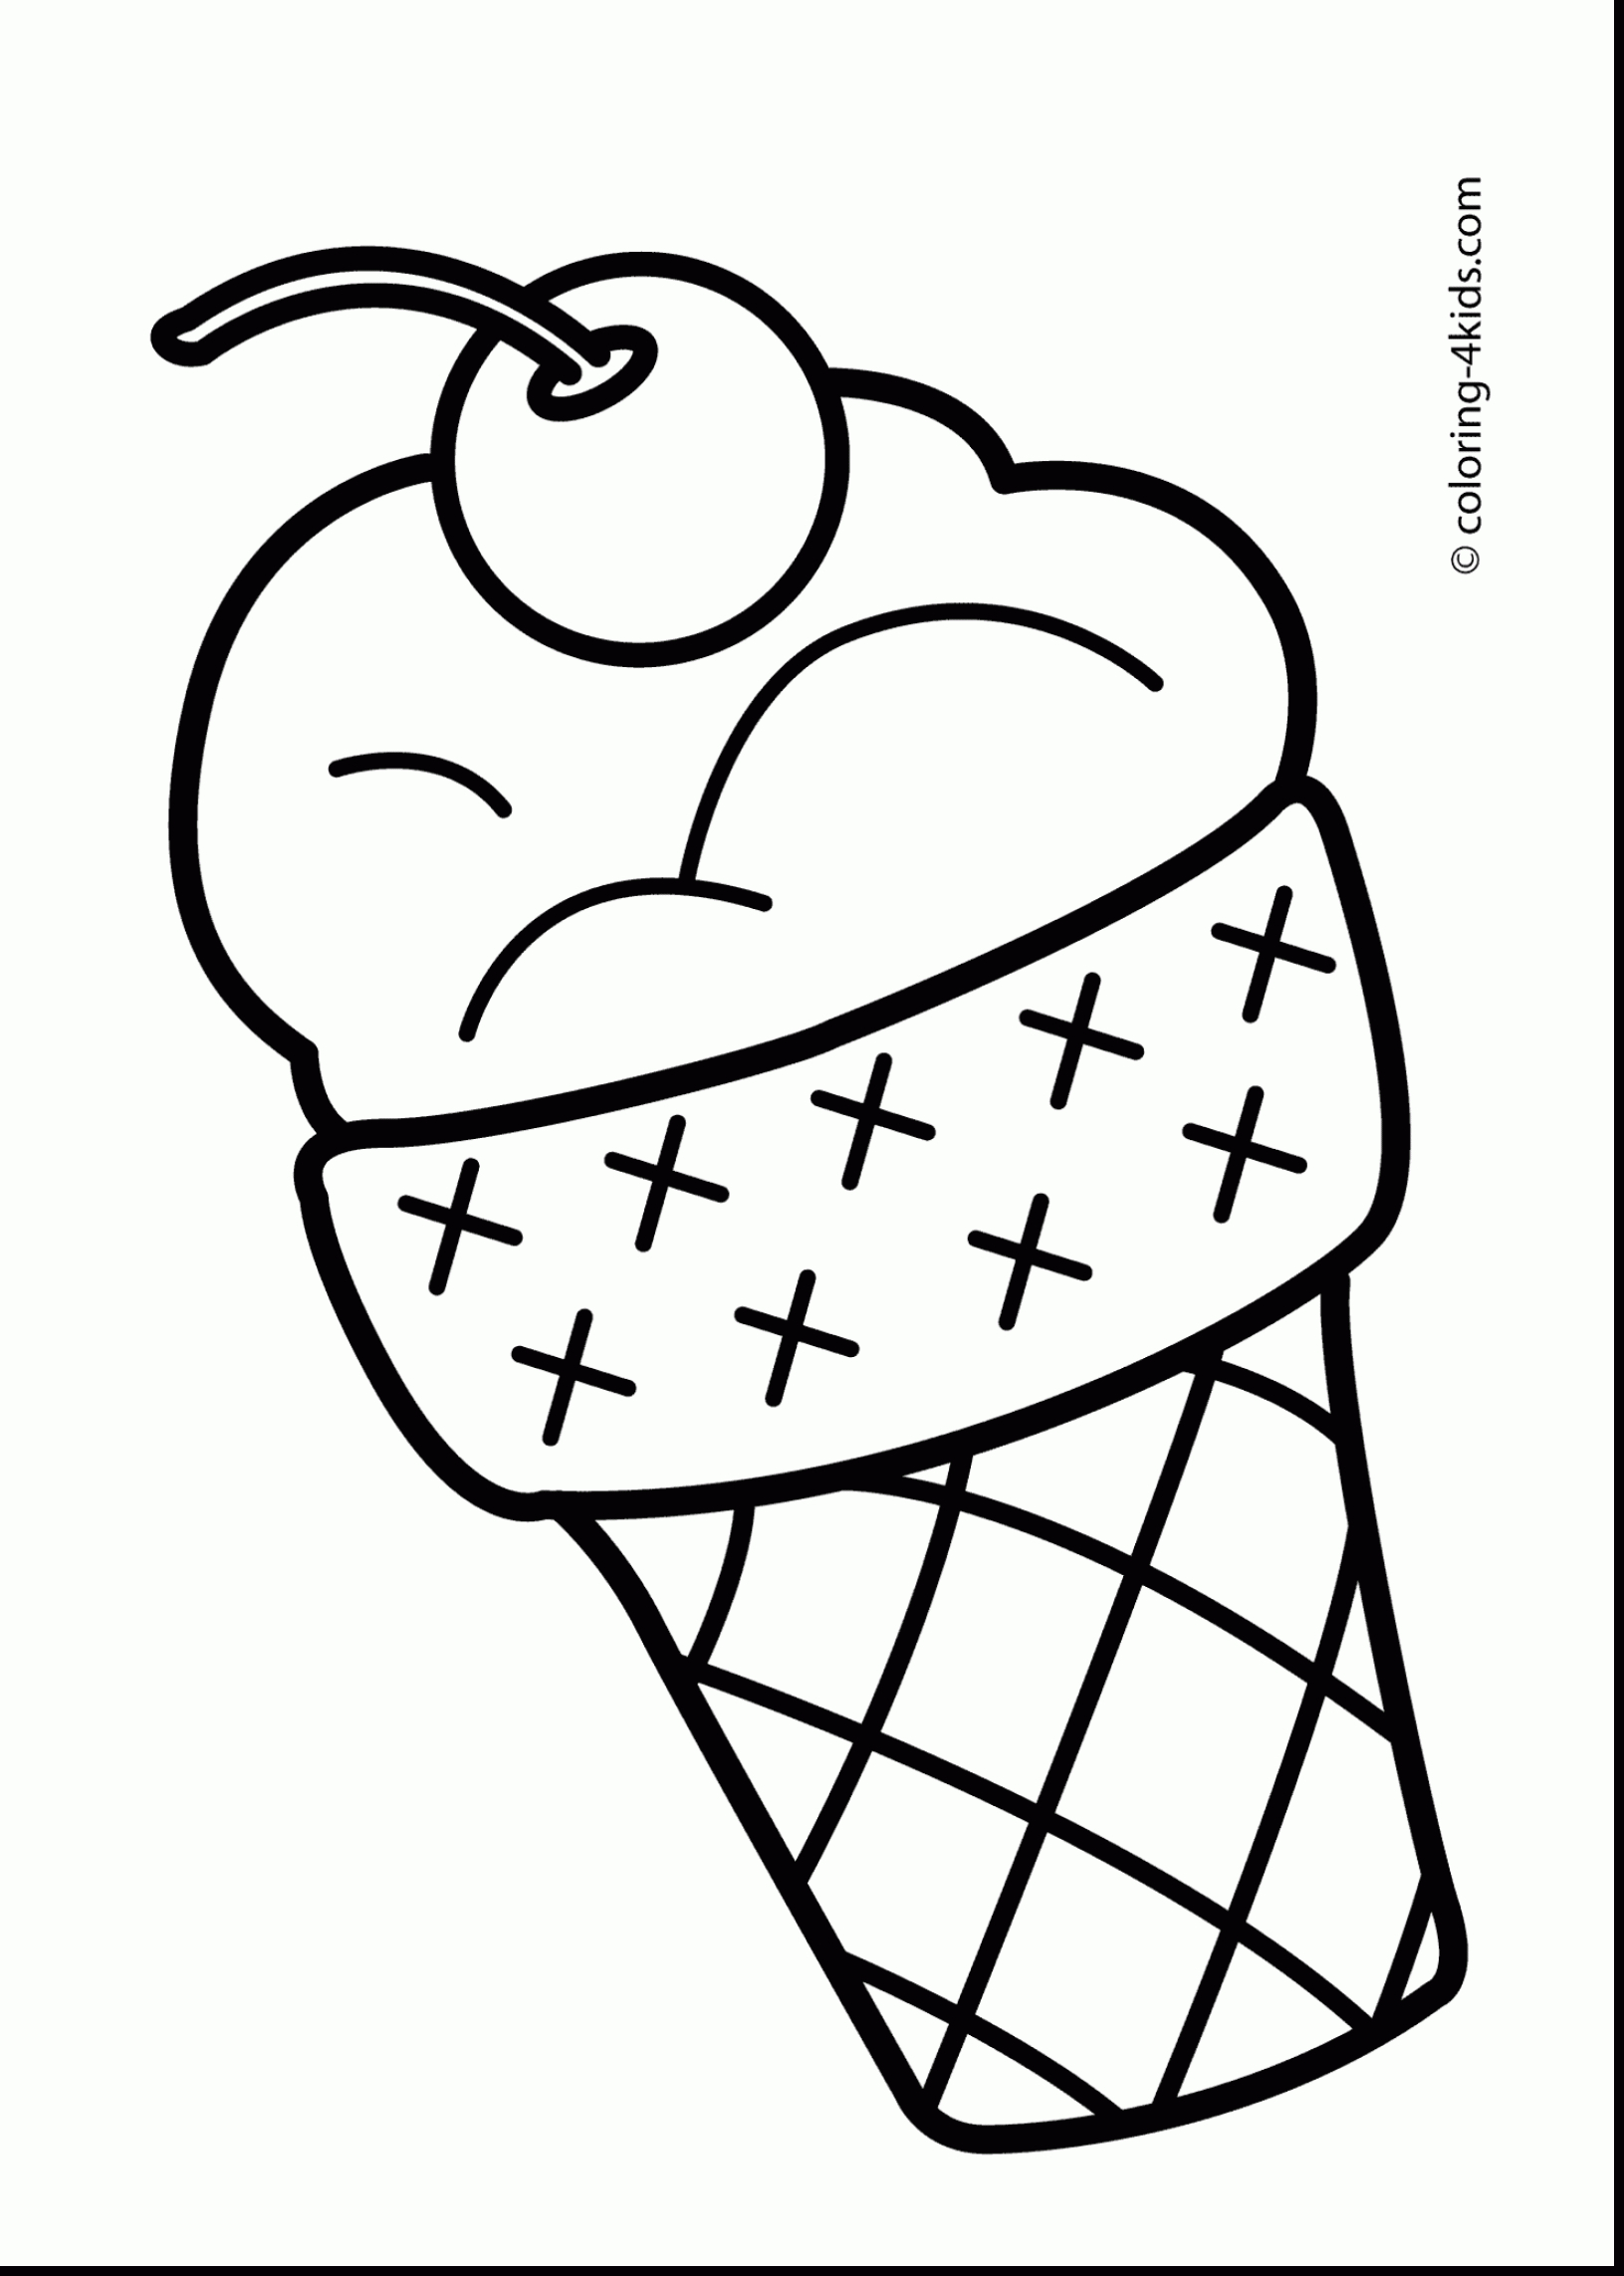 coloring-pages-pictures-for-coloring-toddlers-colouring-pages-free-printable-coloring-pages